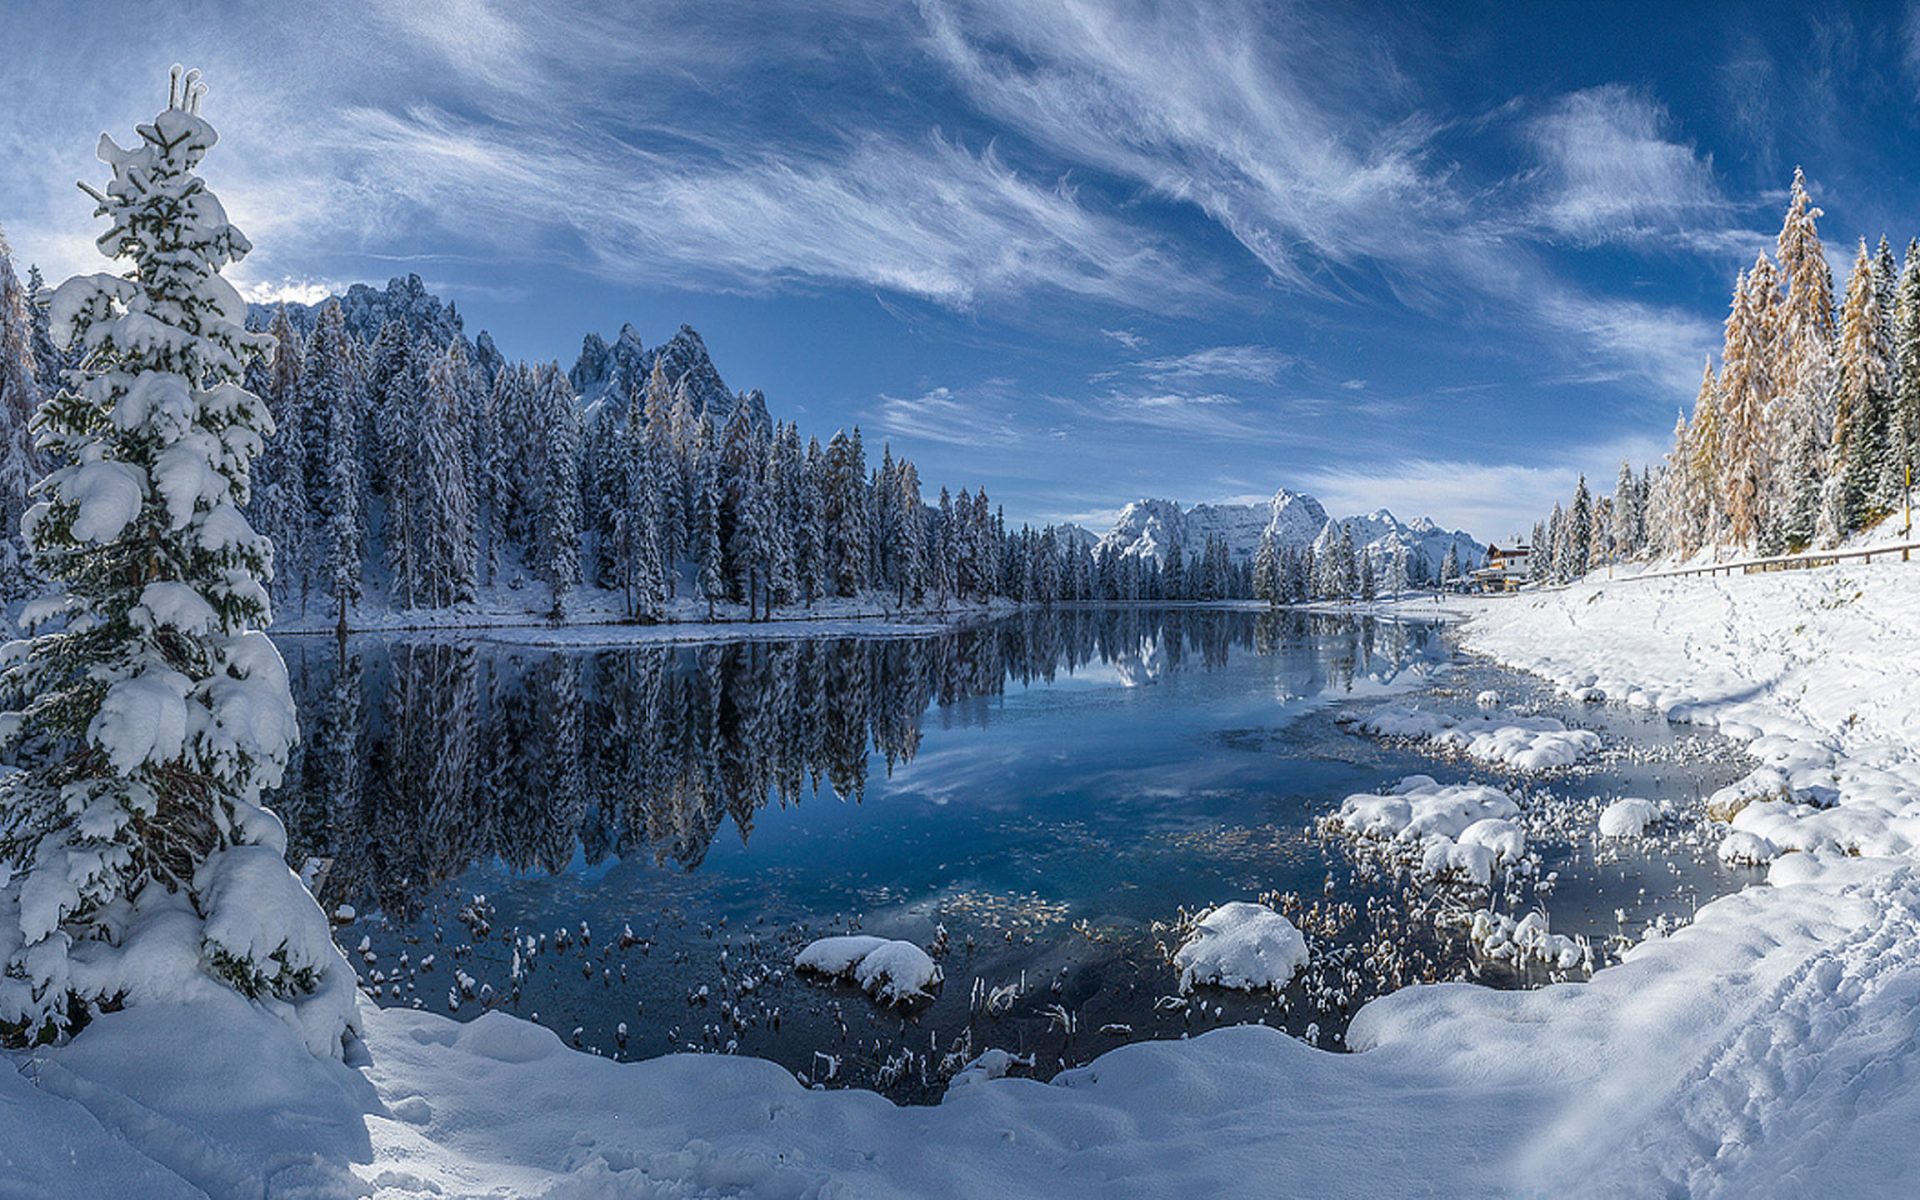 Winter Landscape Lake Reflection Pine Forest Trees With Snow White Tablecloth Blue Sky With White Oblaci.ubava Wallpaper HD For Deskx1440, Wallpaper13.com